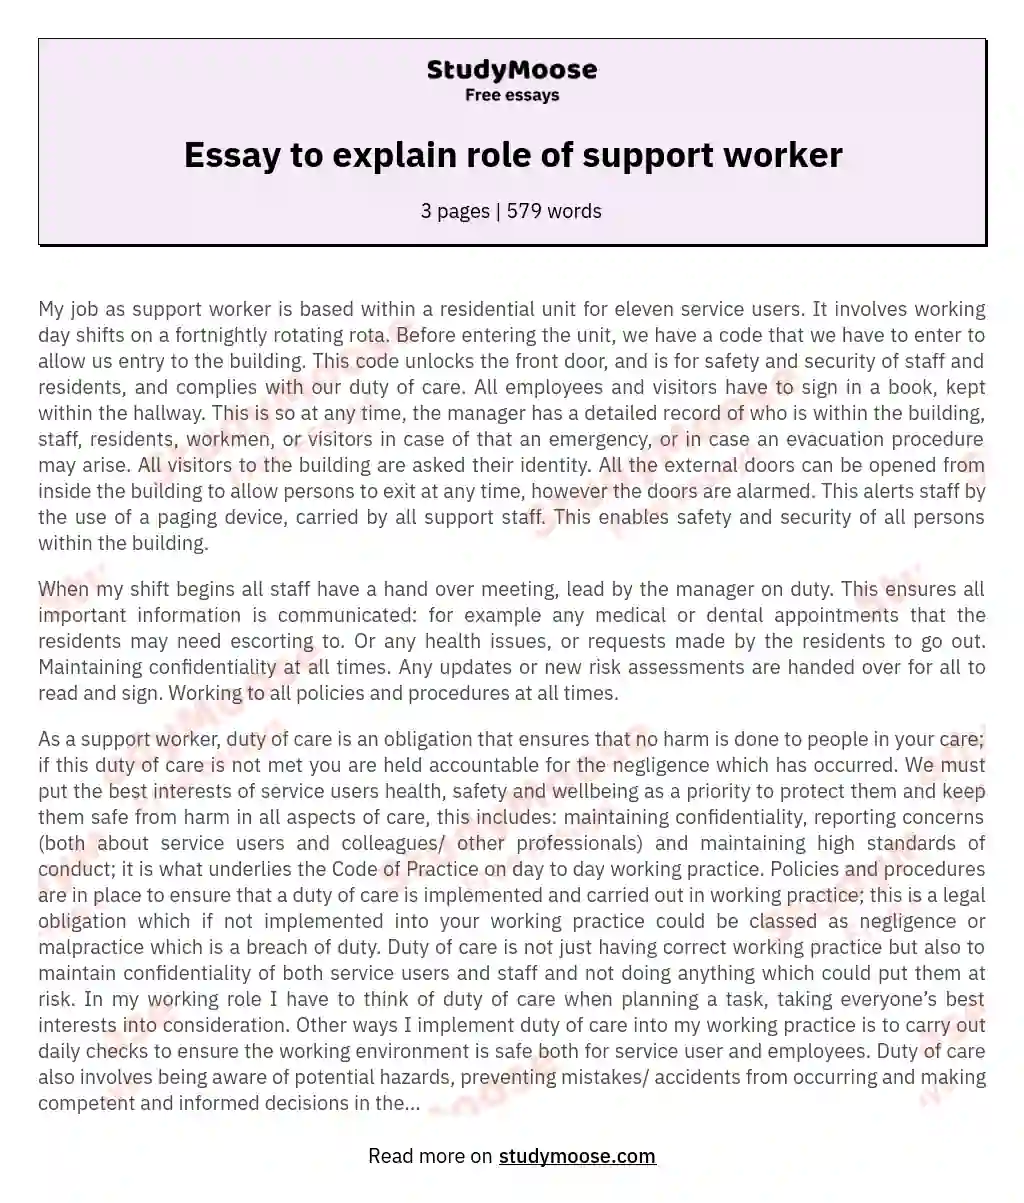 Essay to explain role of support worker essay